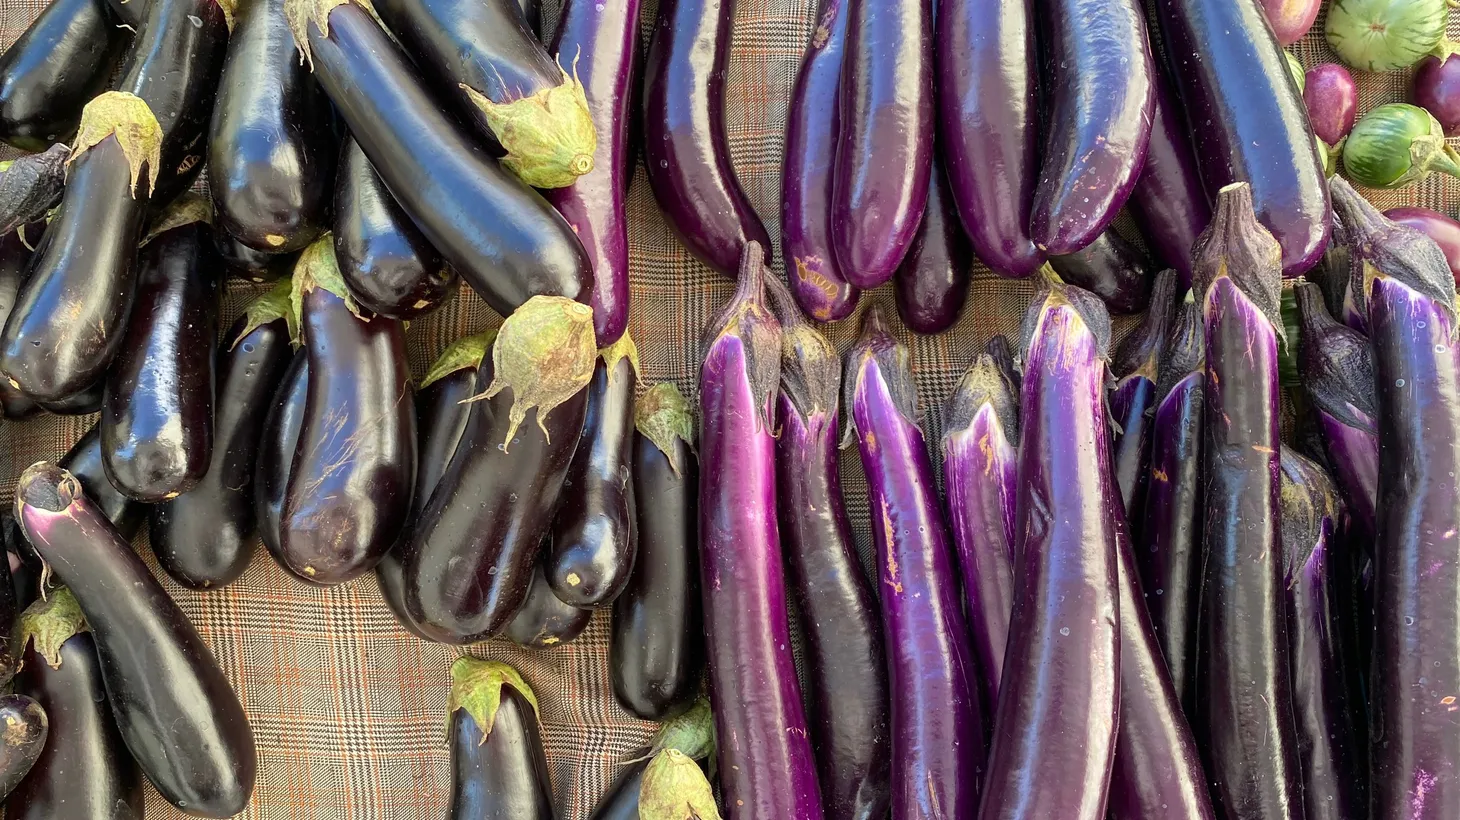 The Chinese and Japanese varieties of eggplant have a slender appearance as opposed to their Italian counterpart.